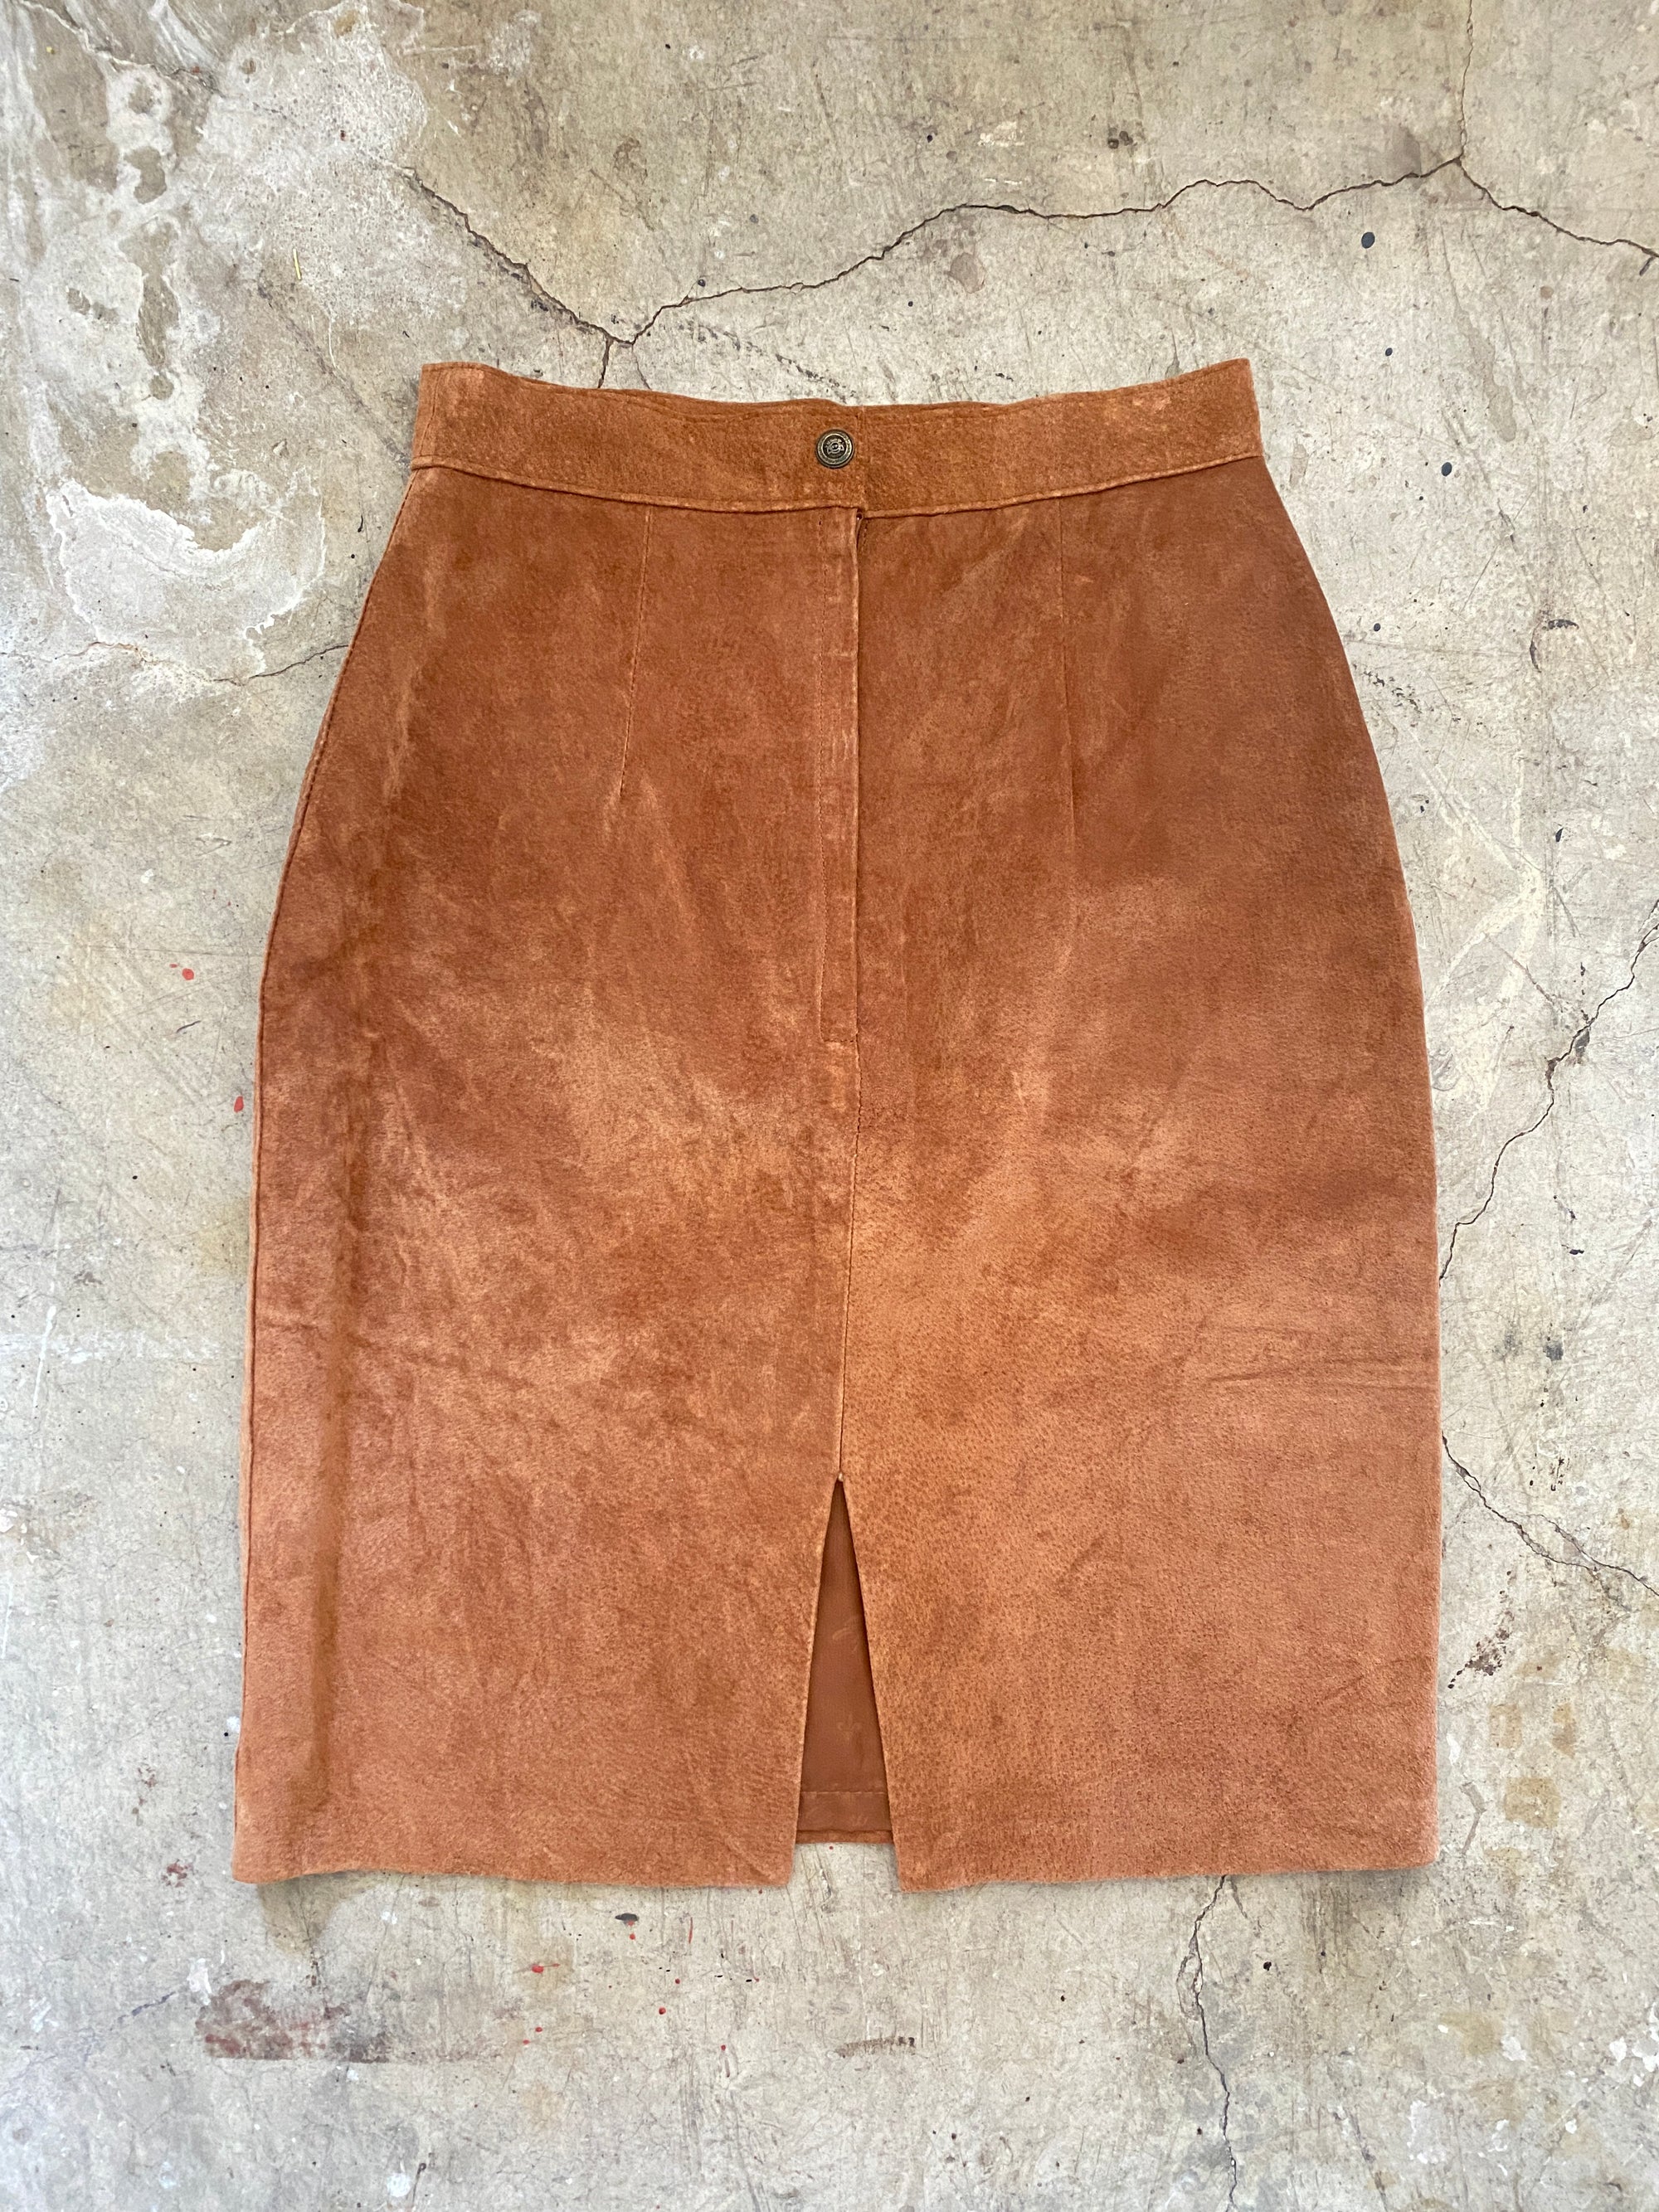 1990's Brown Suede Pencil Skirt